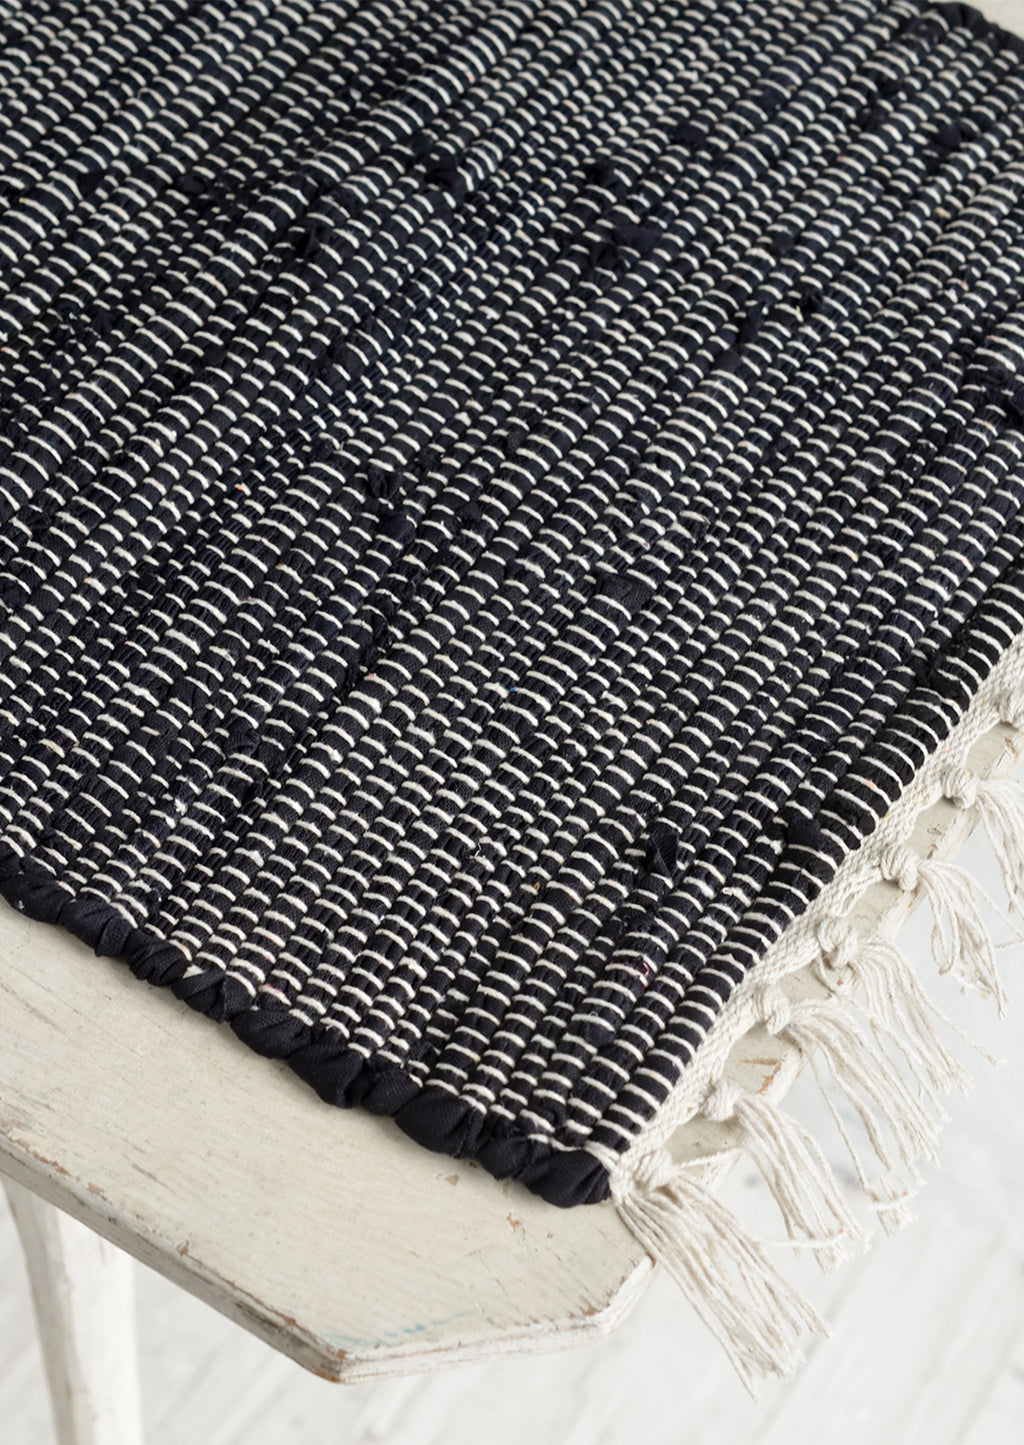 2: A black and white chindi weave table runner.